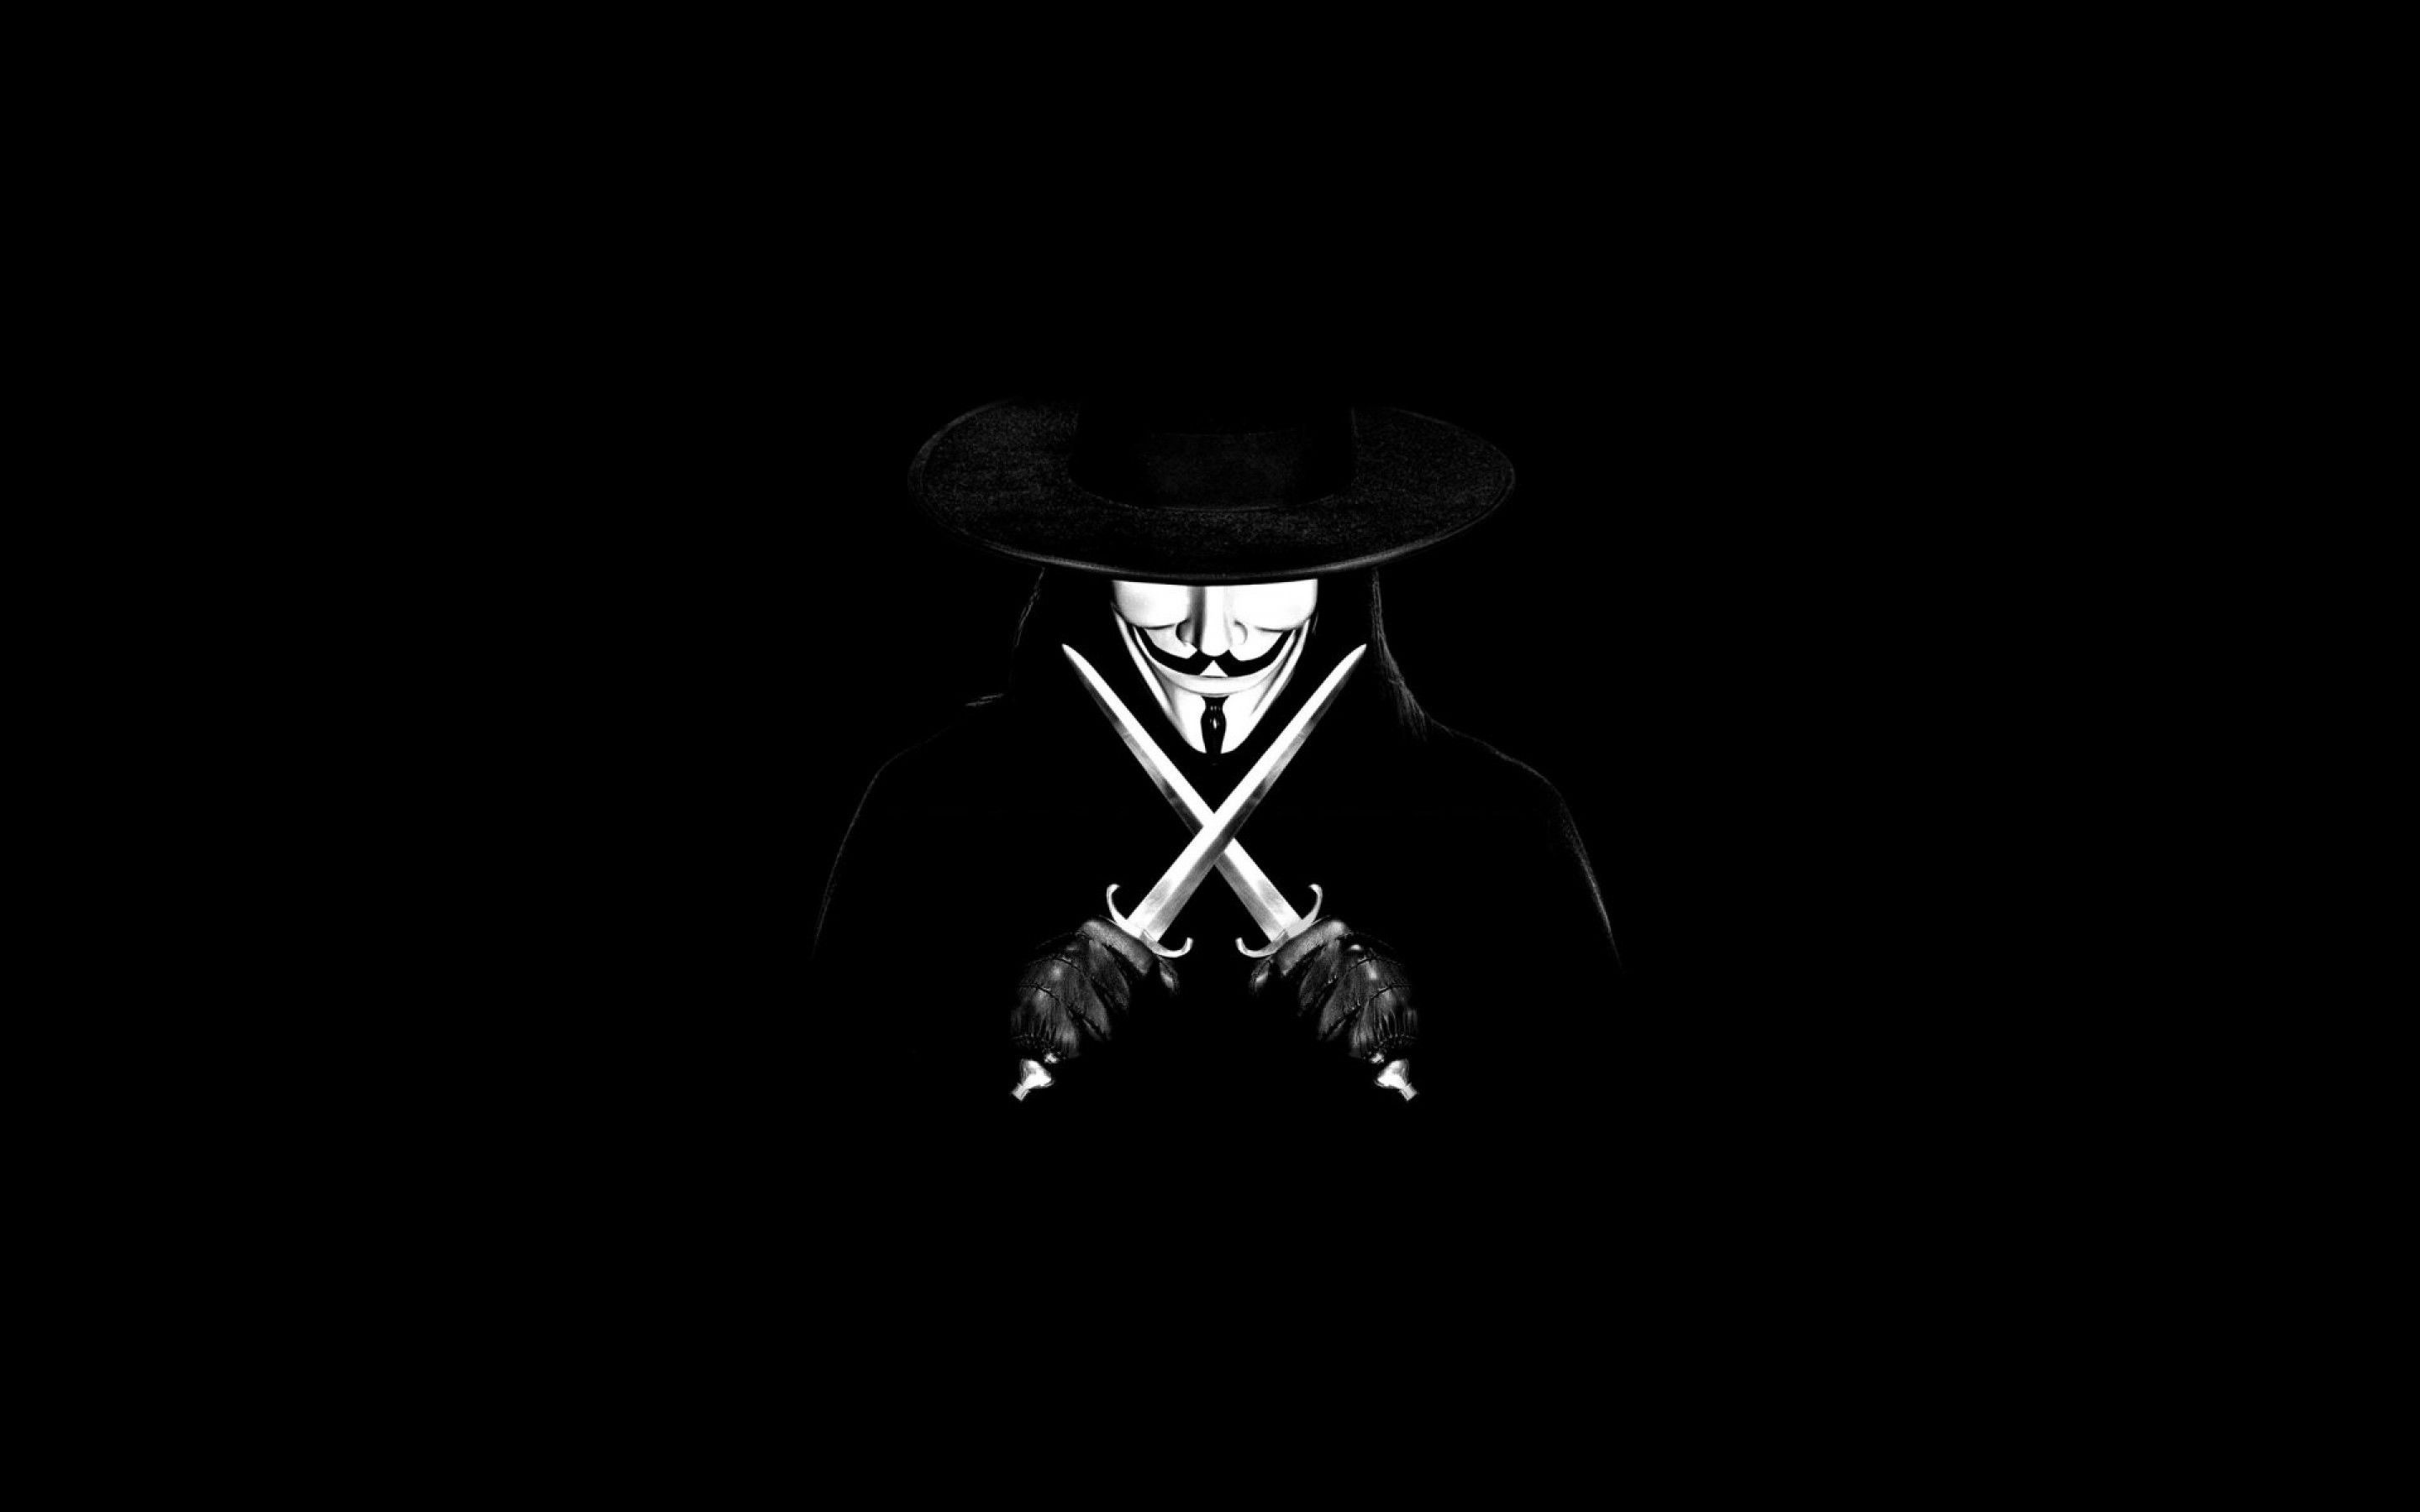 Guy Fawkes Mask: Worn by the V for Vendetta anarchist protagonist V. 2880x1800 HD Wallpaper.